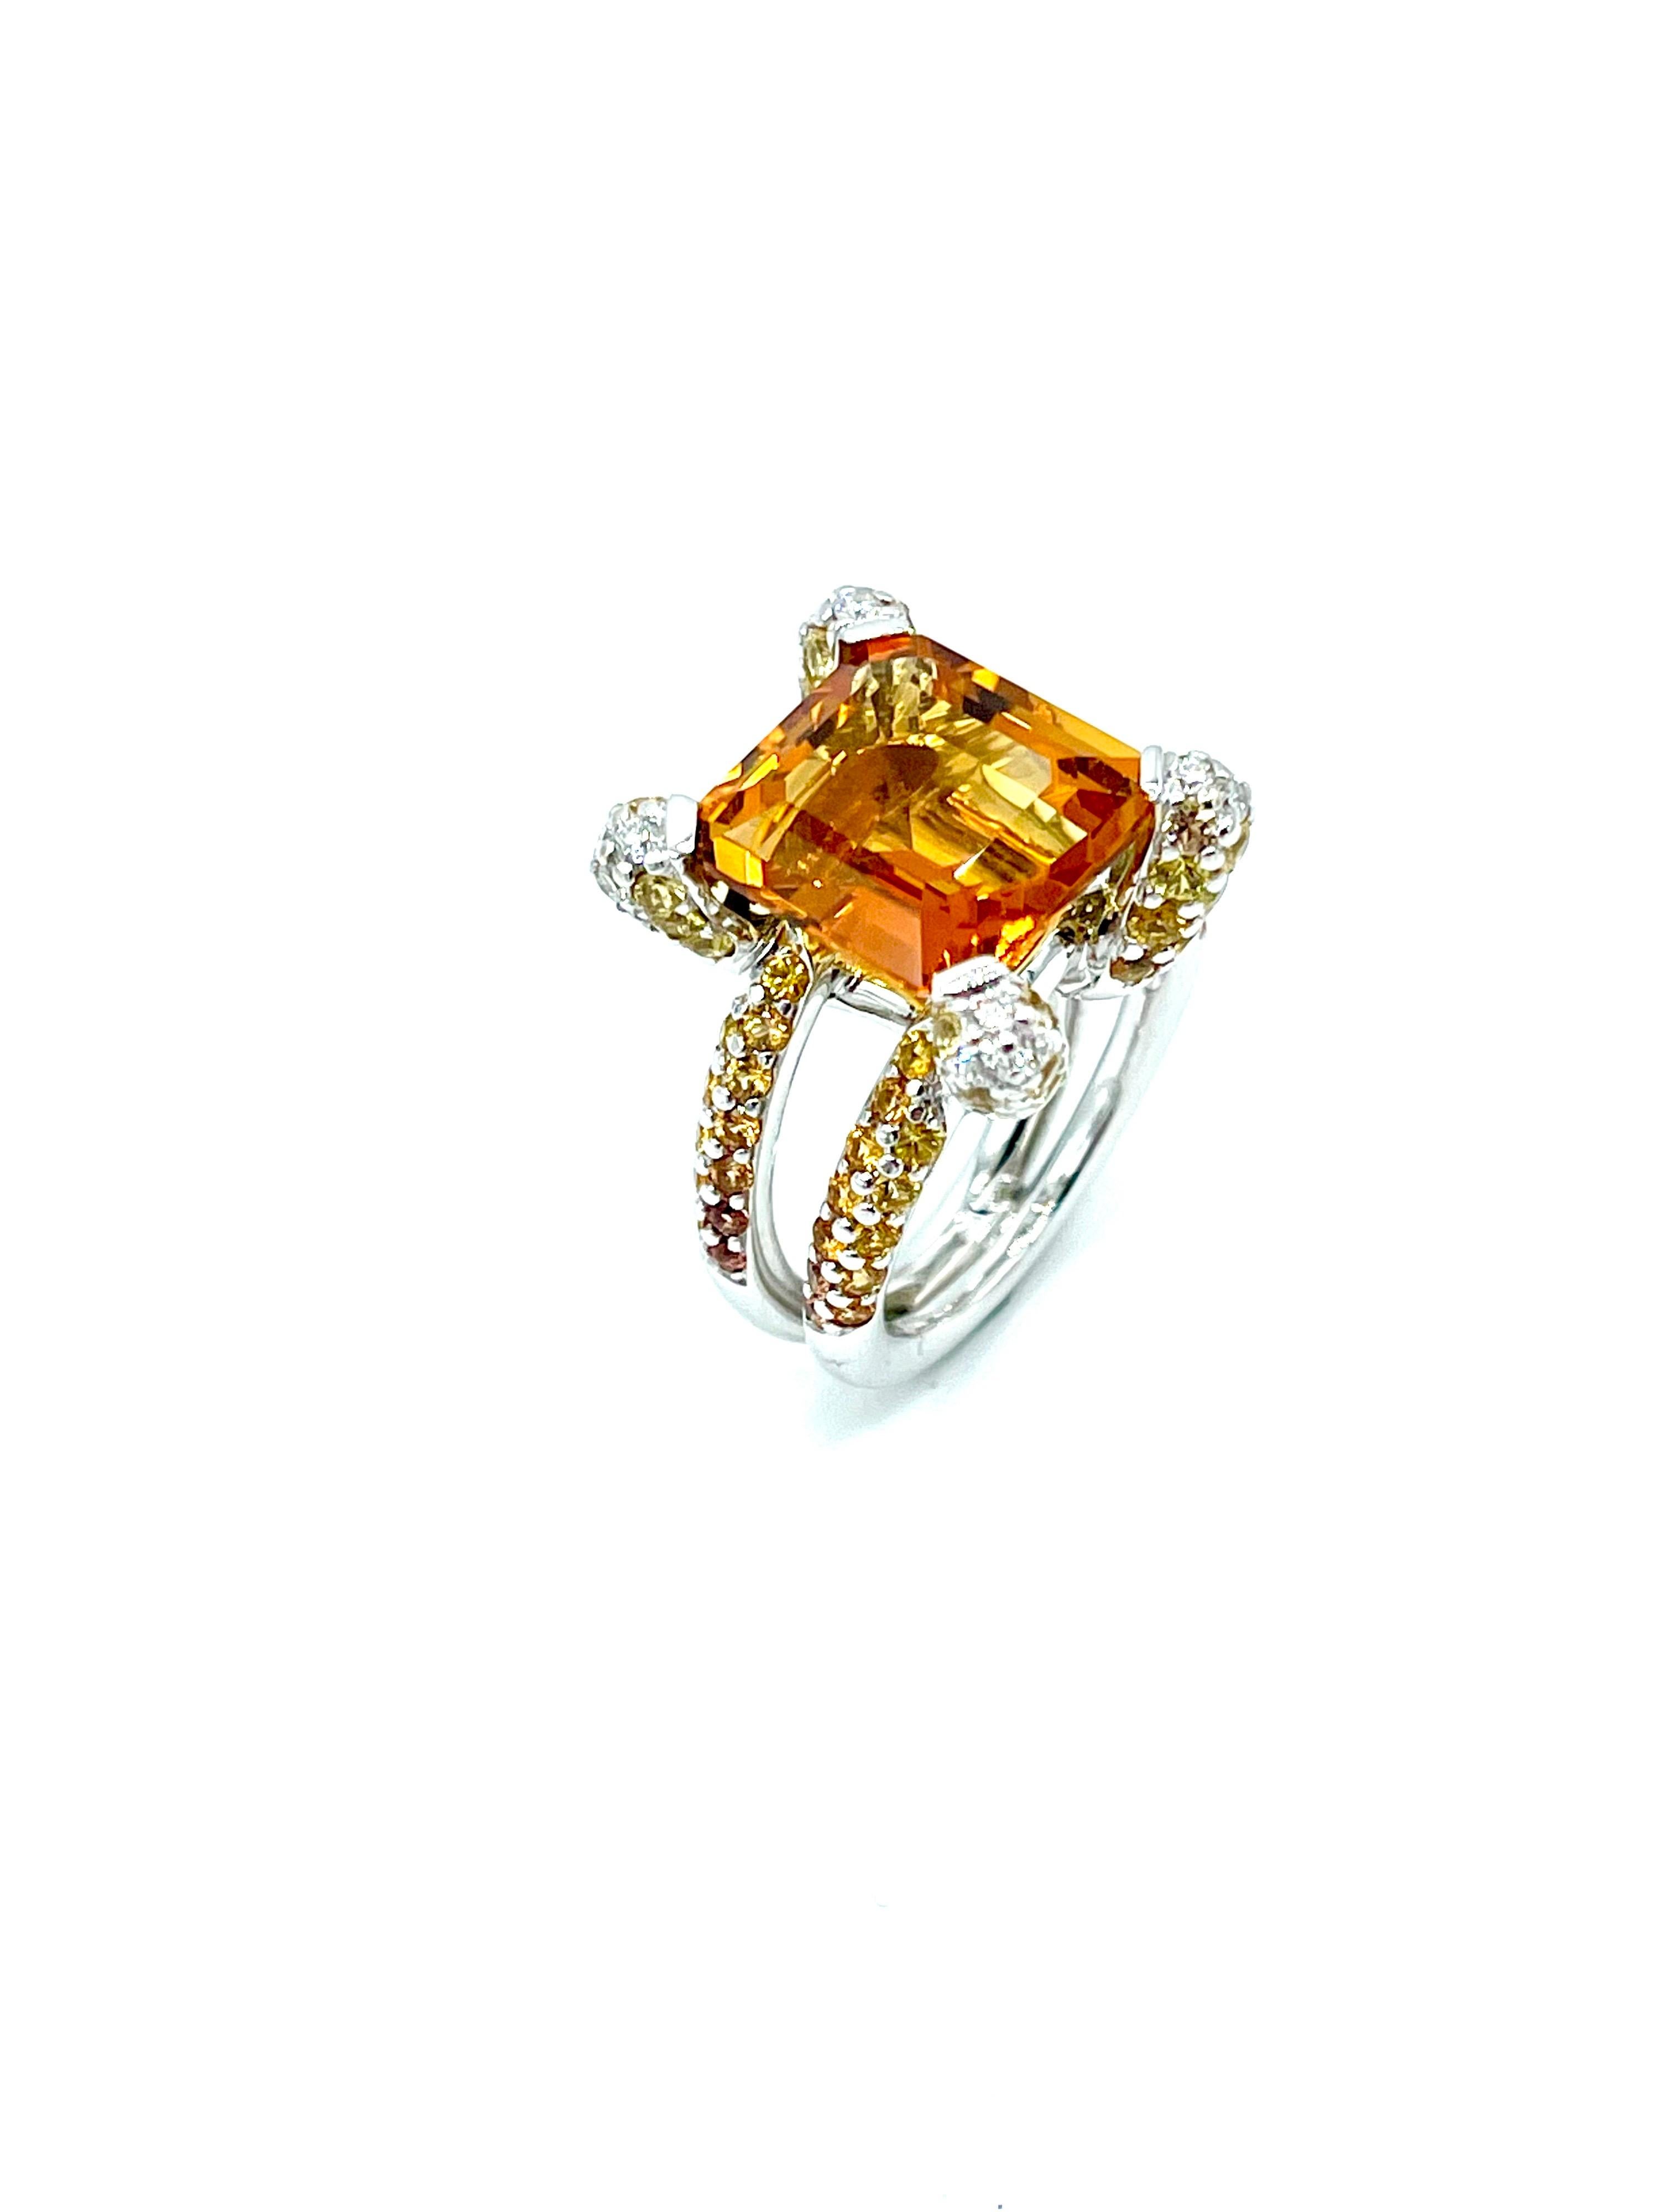 A truly stunning work of art!  This Madeira Citrine fires up with light.  It is emerald cut and weighs 6.00 carats, set with four Diamond and Citrine pave prongs, with a pave Citrine split shank in 18K white gold.  There are 0.26 carats in round